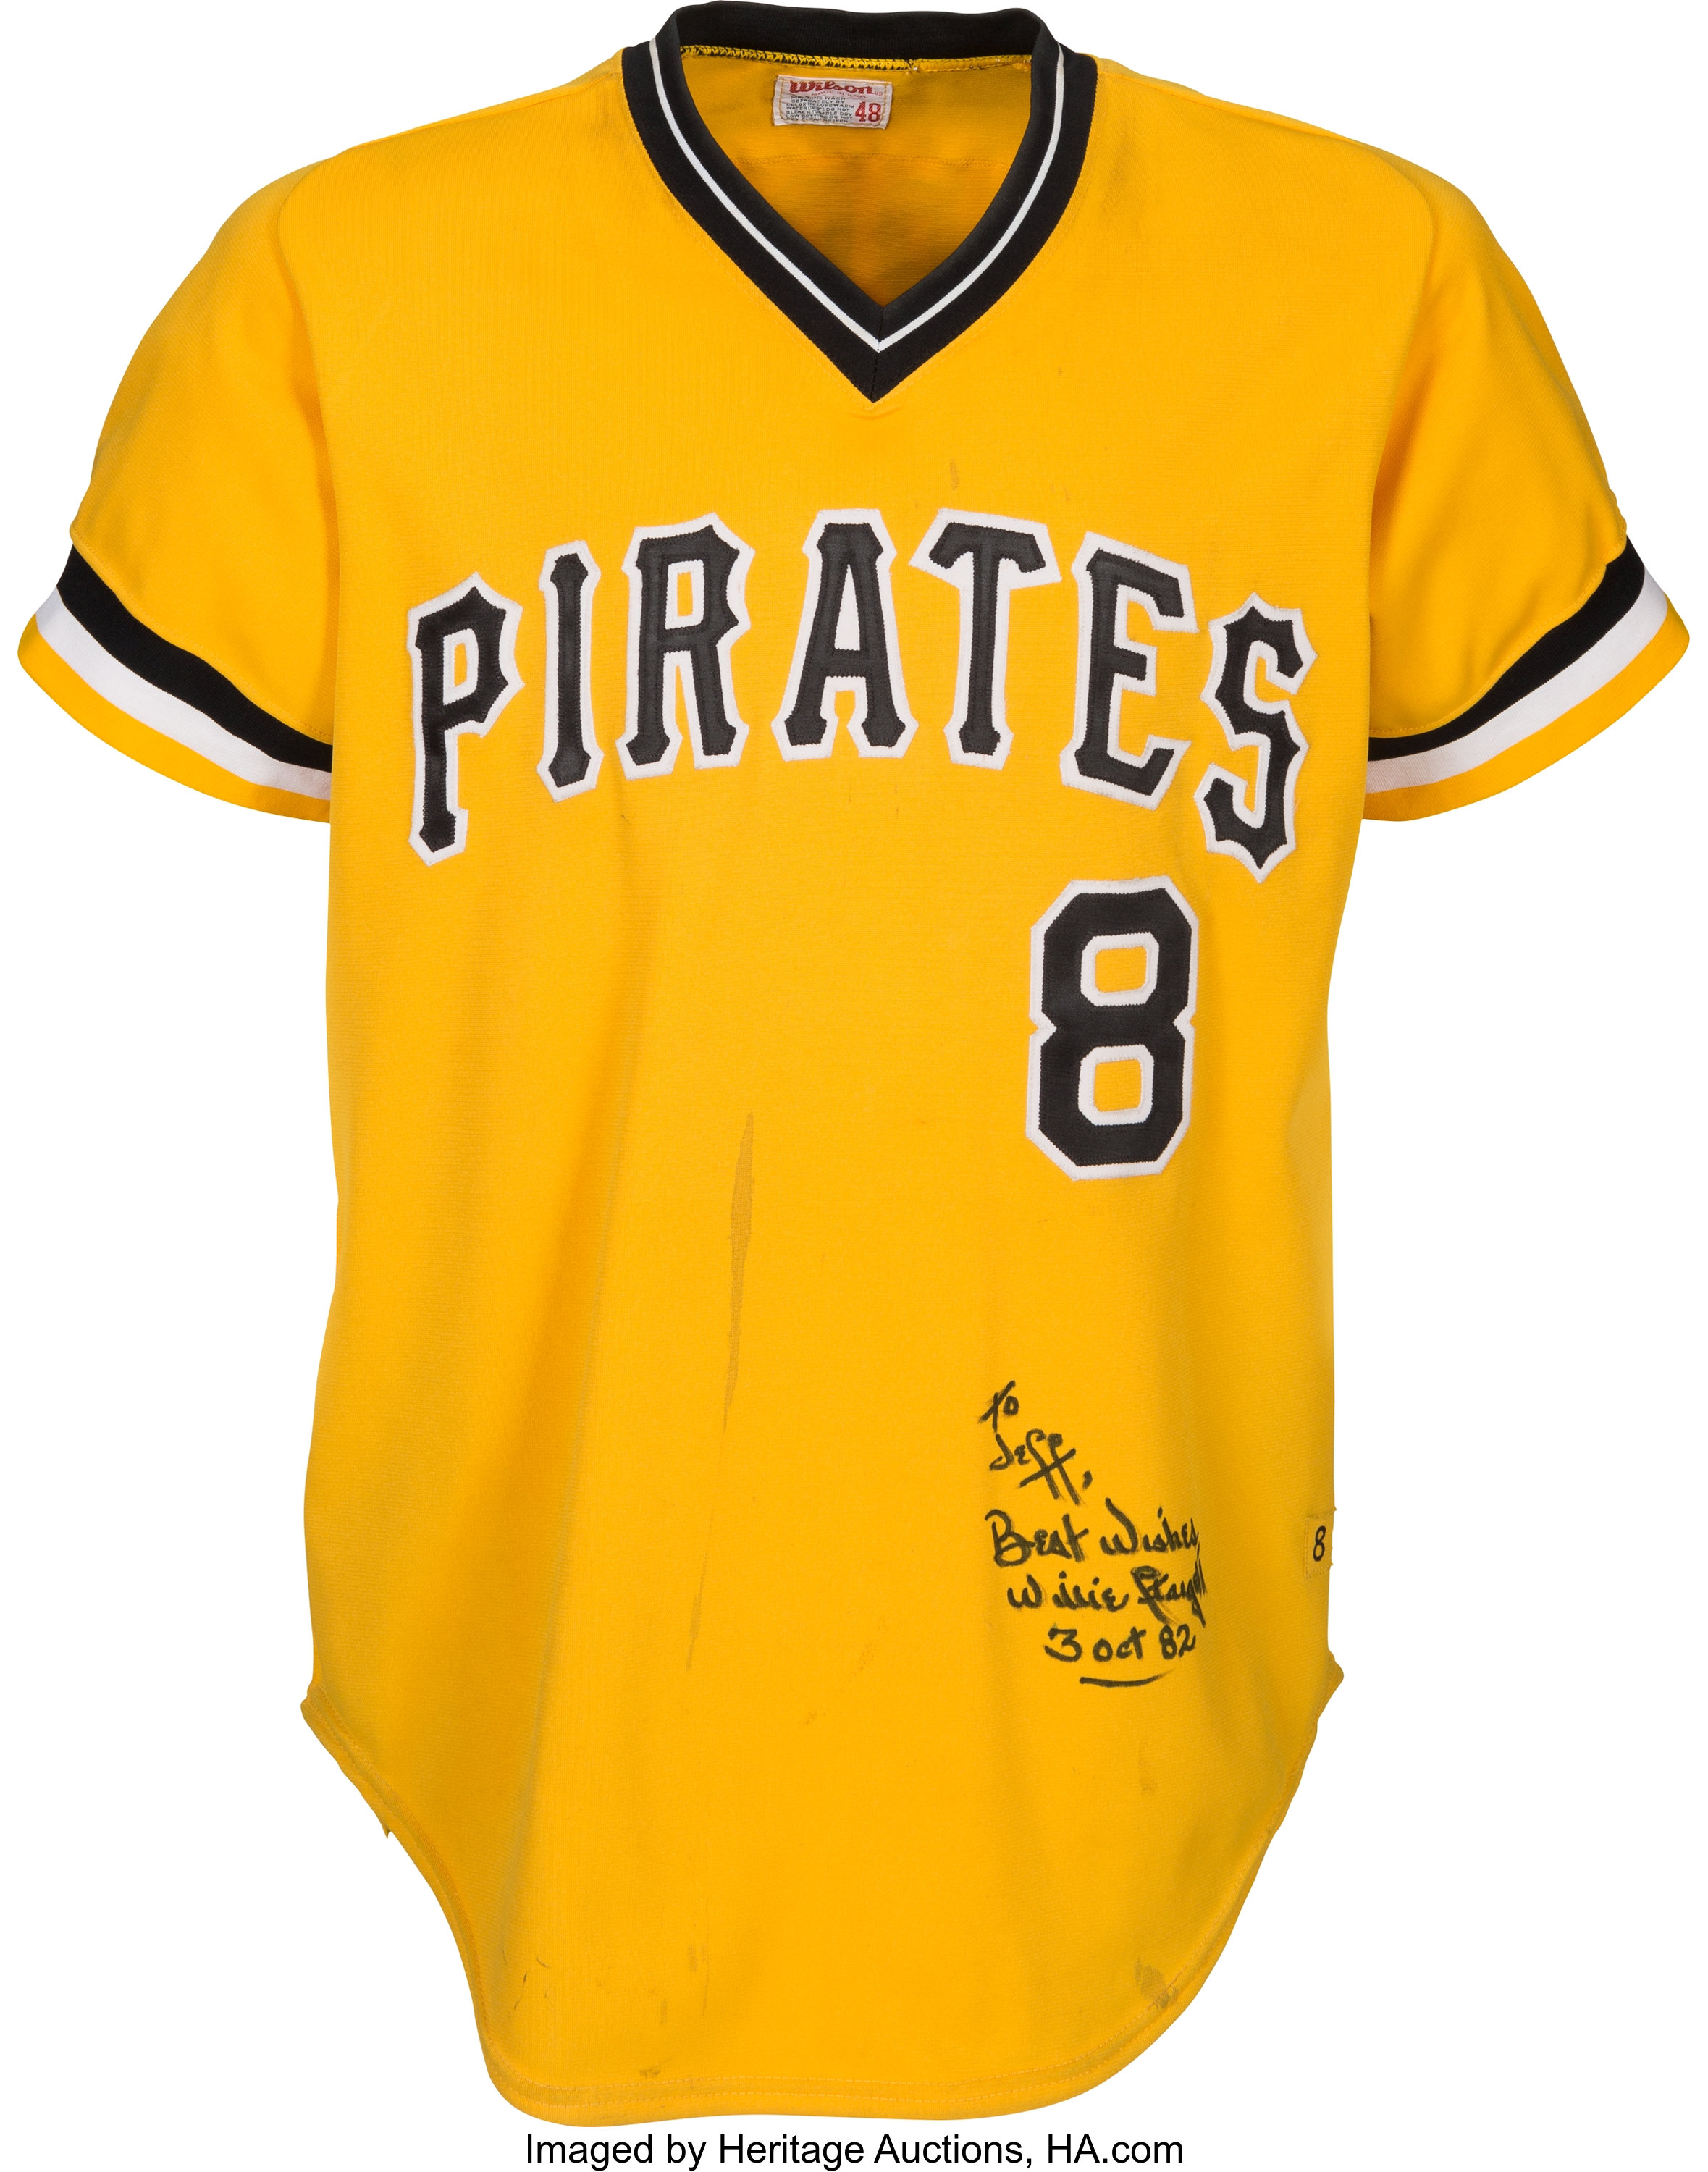 1982 Willie Stargell Game Worn & Signed Pittsburgh Pirates Jersey,, Lot  #80551